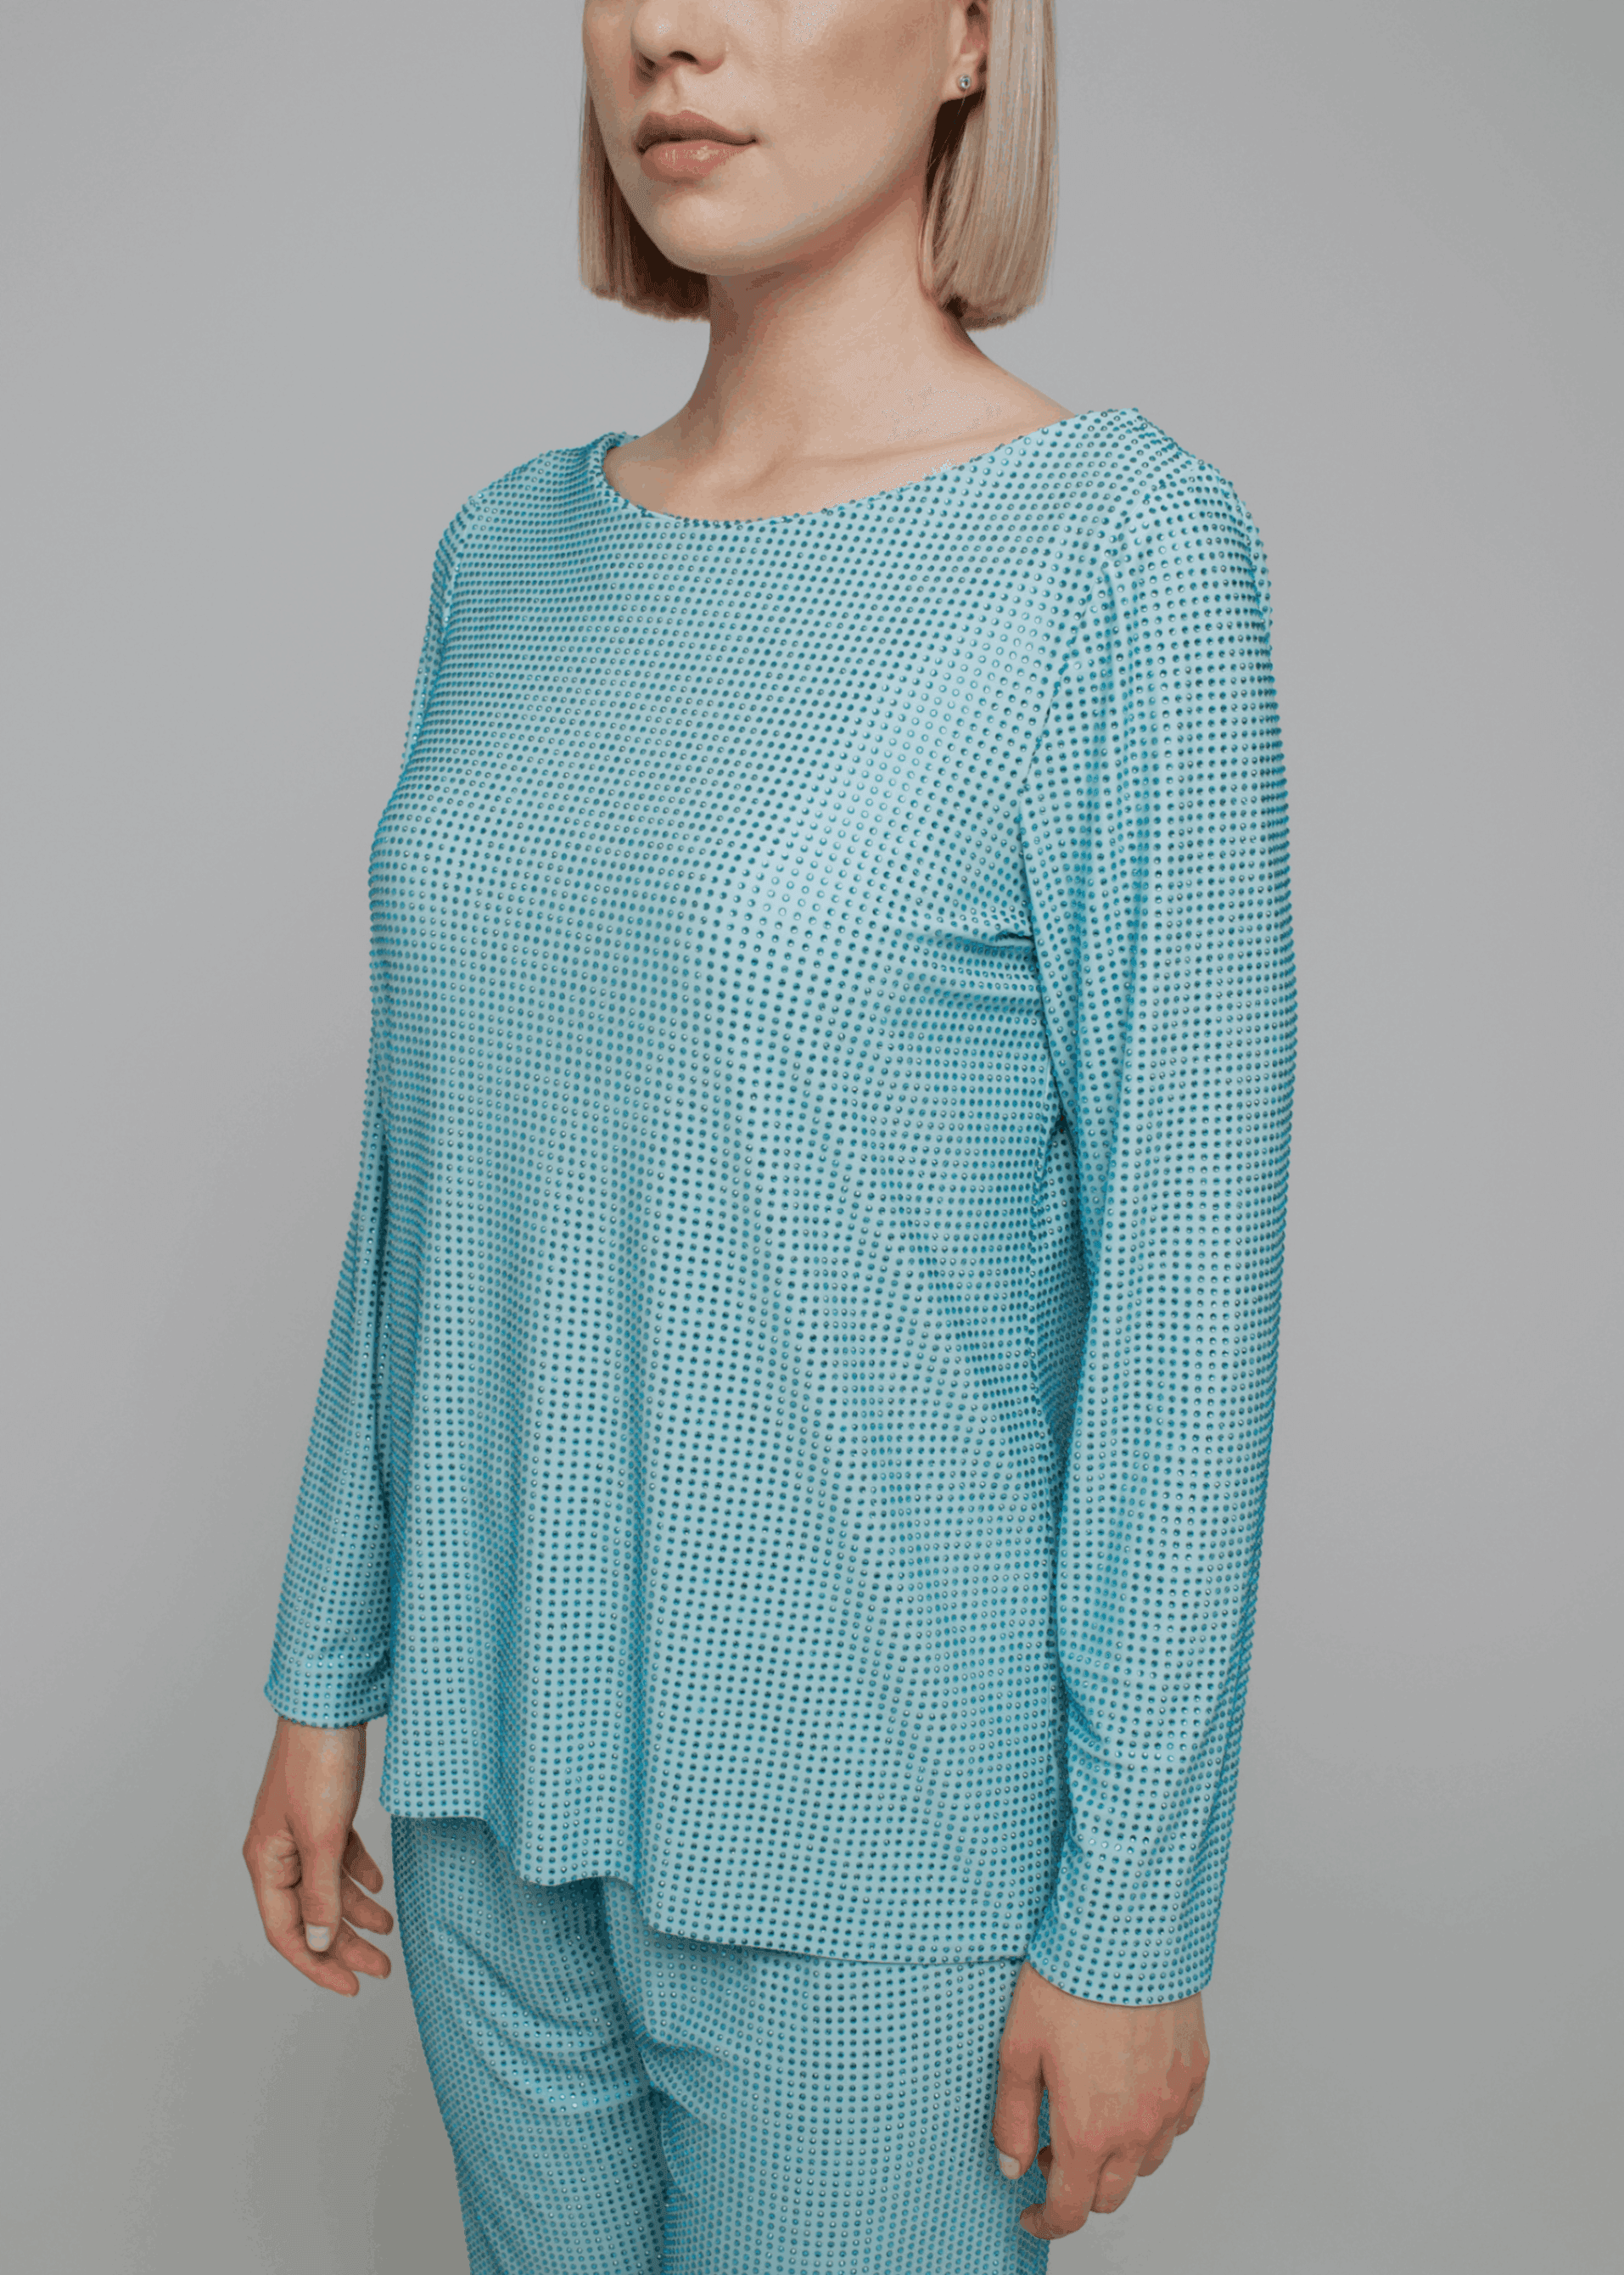 Exquisite detail of Axinia Crystal Long Sleeve Tunica Top showcasing the fine craftsmanship and elegant design characteristic of Axinia Collection 's luxury collection.